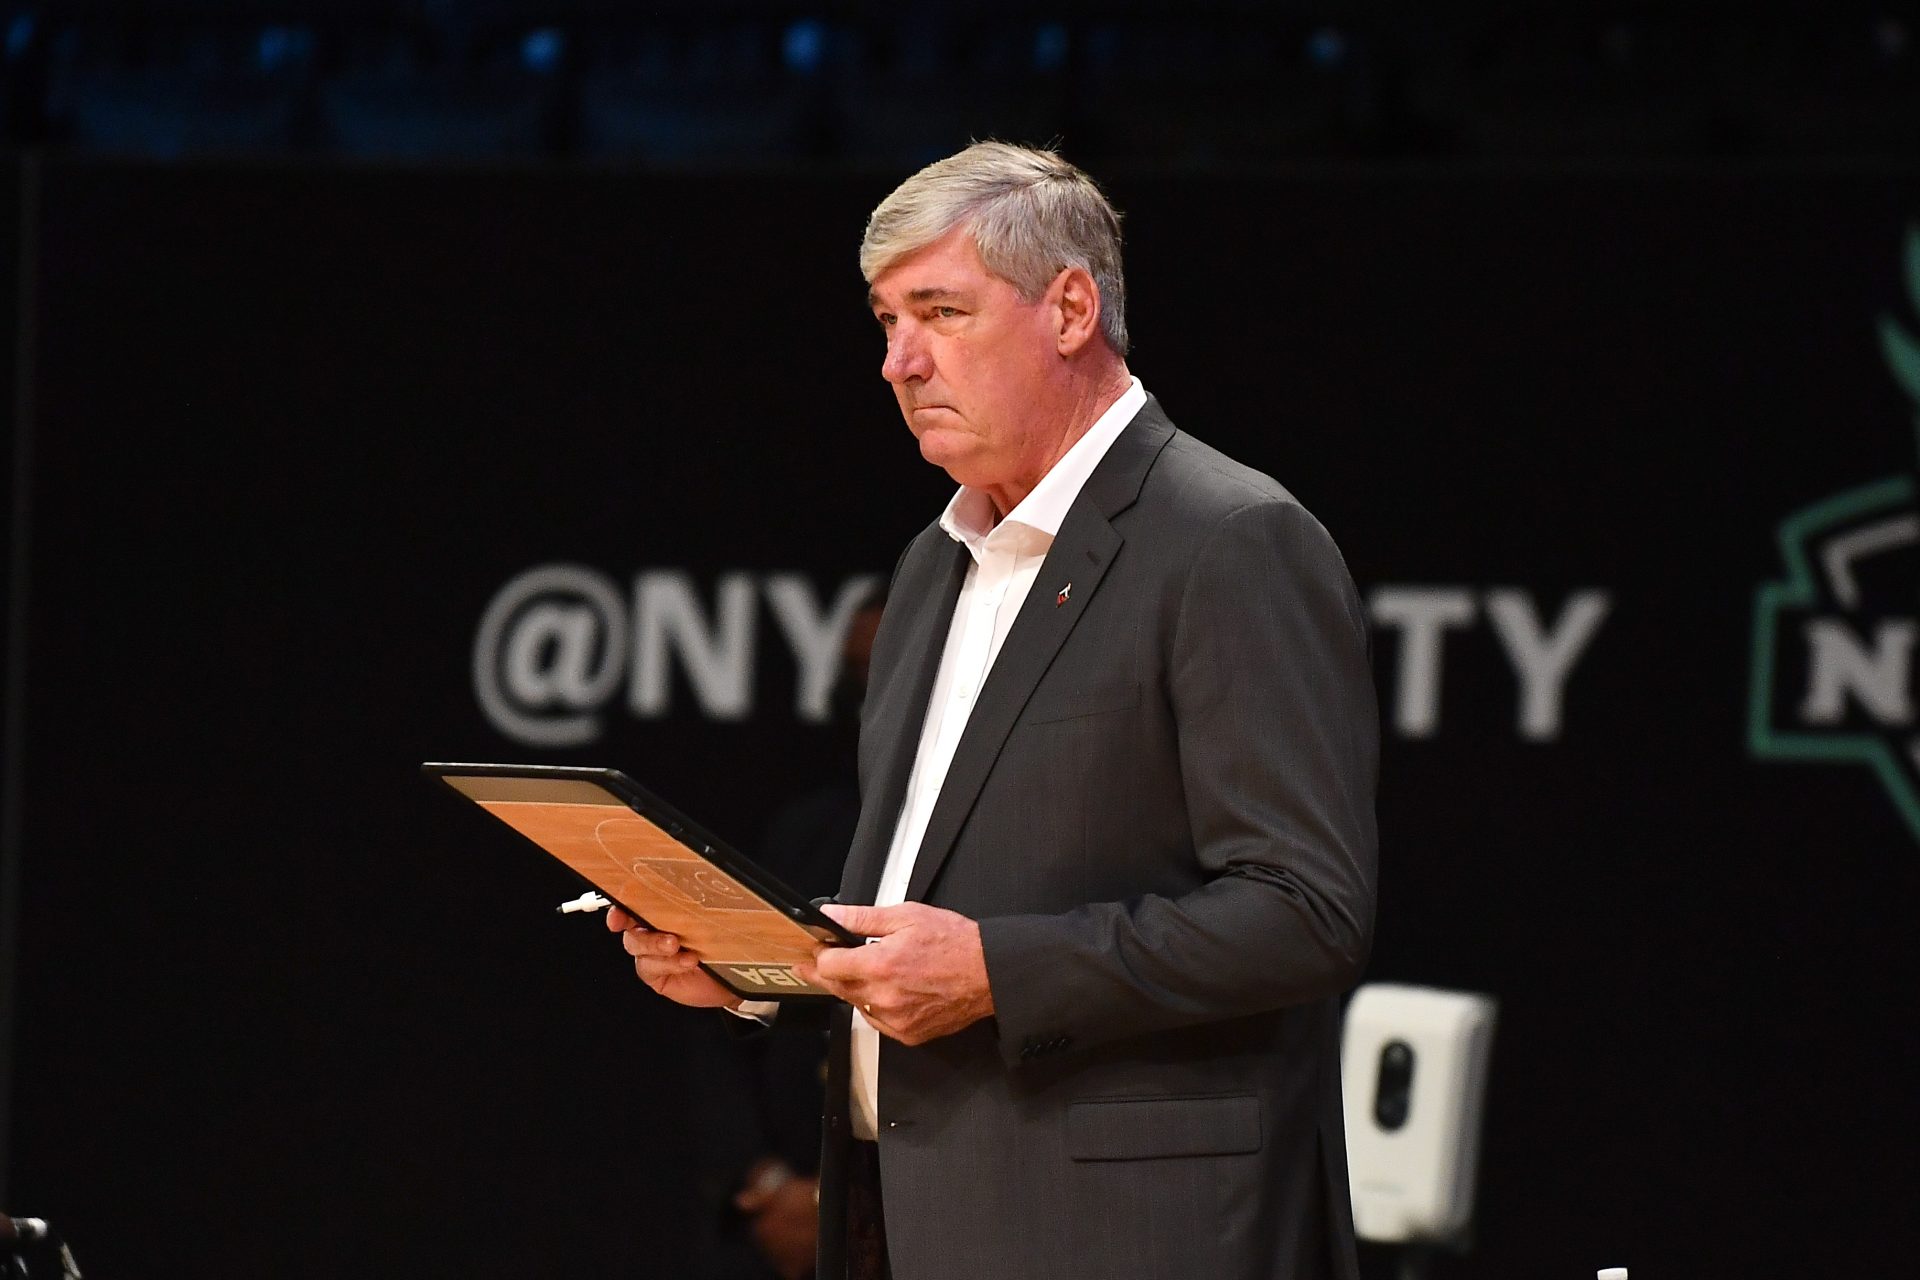 Aces’ Bill Laimbeer Passes Brian Agler for No. 2 on WNBA’s All-Time Wins Checklist